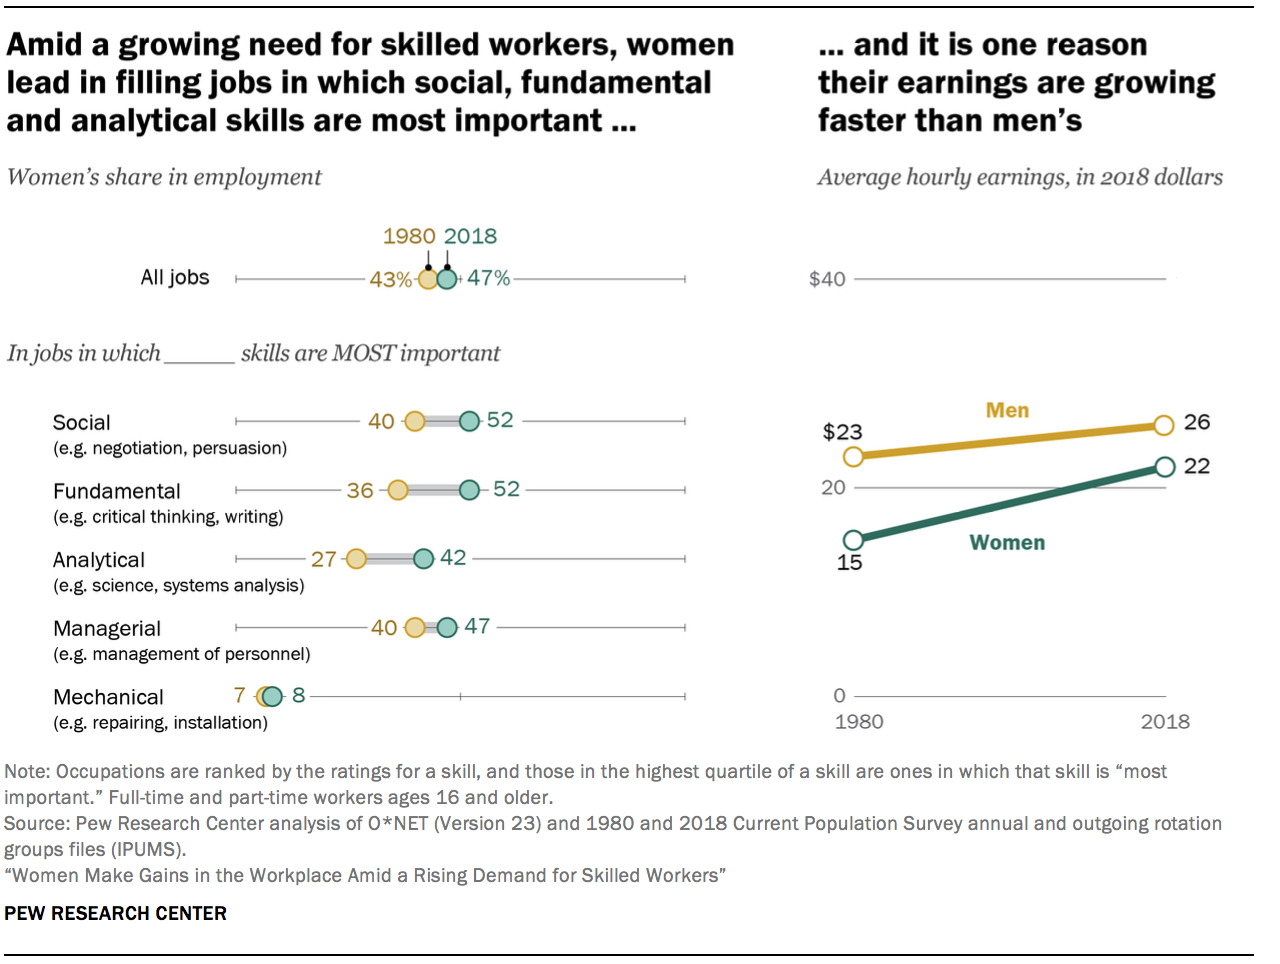 Amid a growing need for skilled workers, women lead in filling jobs in which social, fundamental and analytical skills are most important